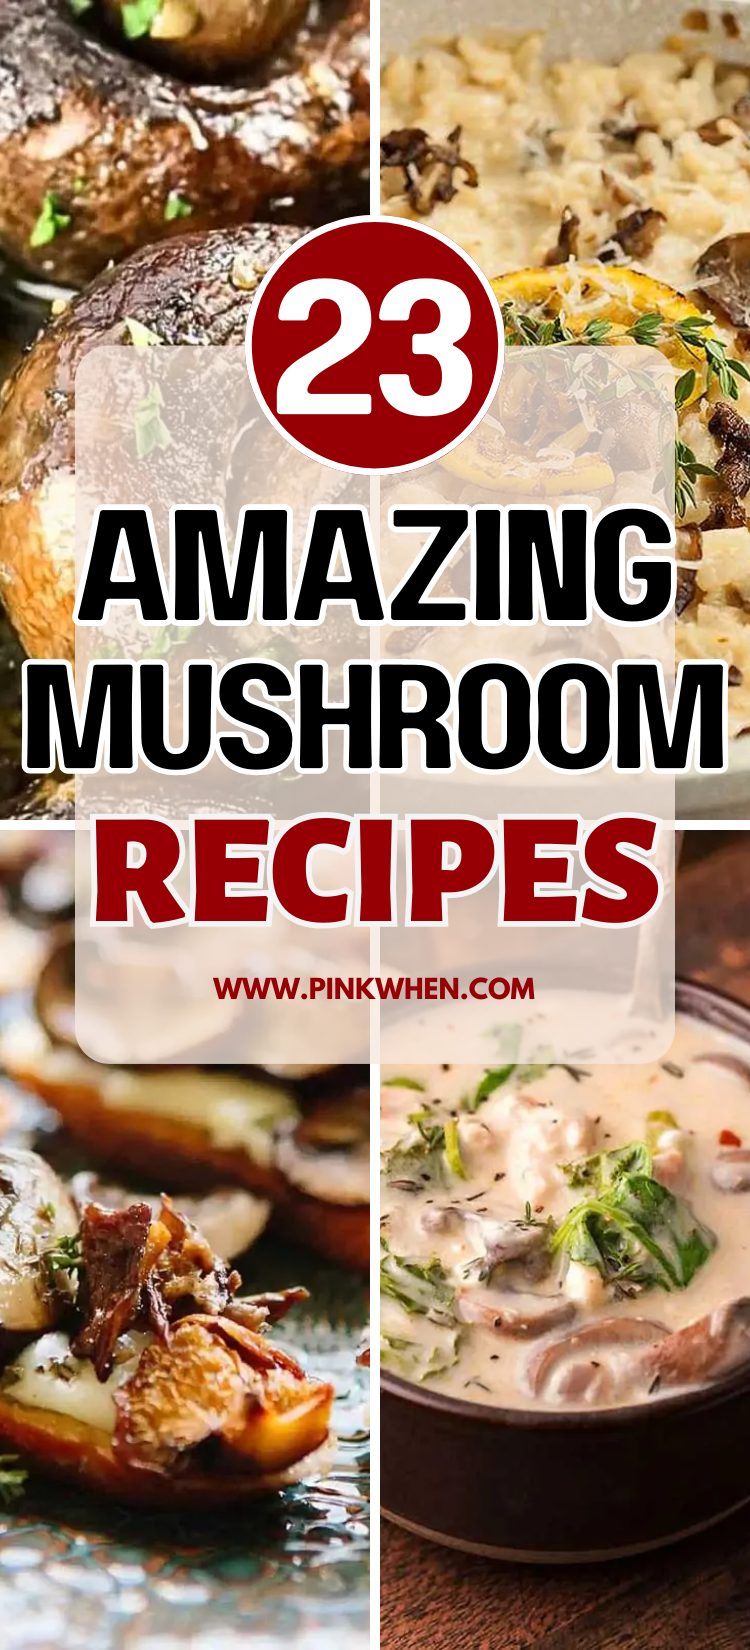 23 Amazing Mushroom Recipes for Any Occasion